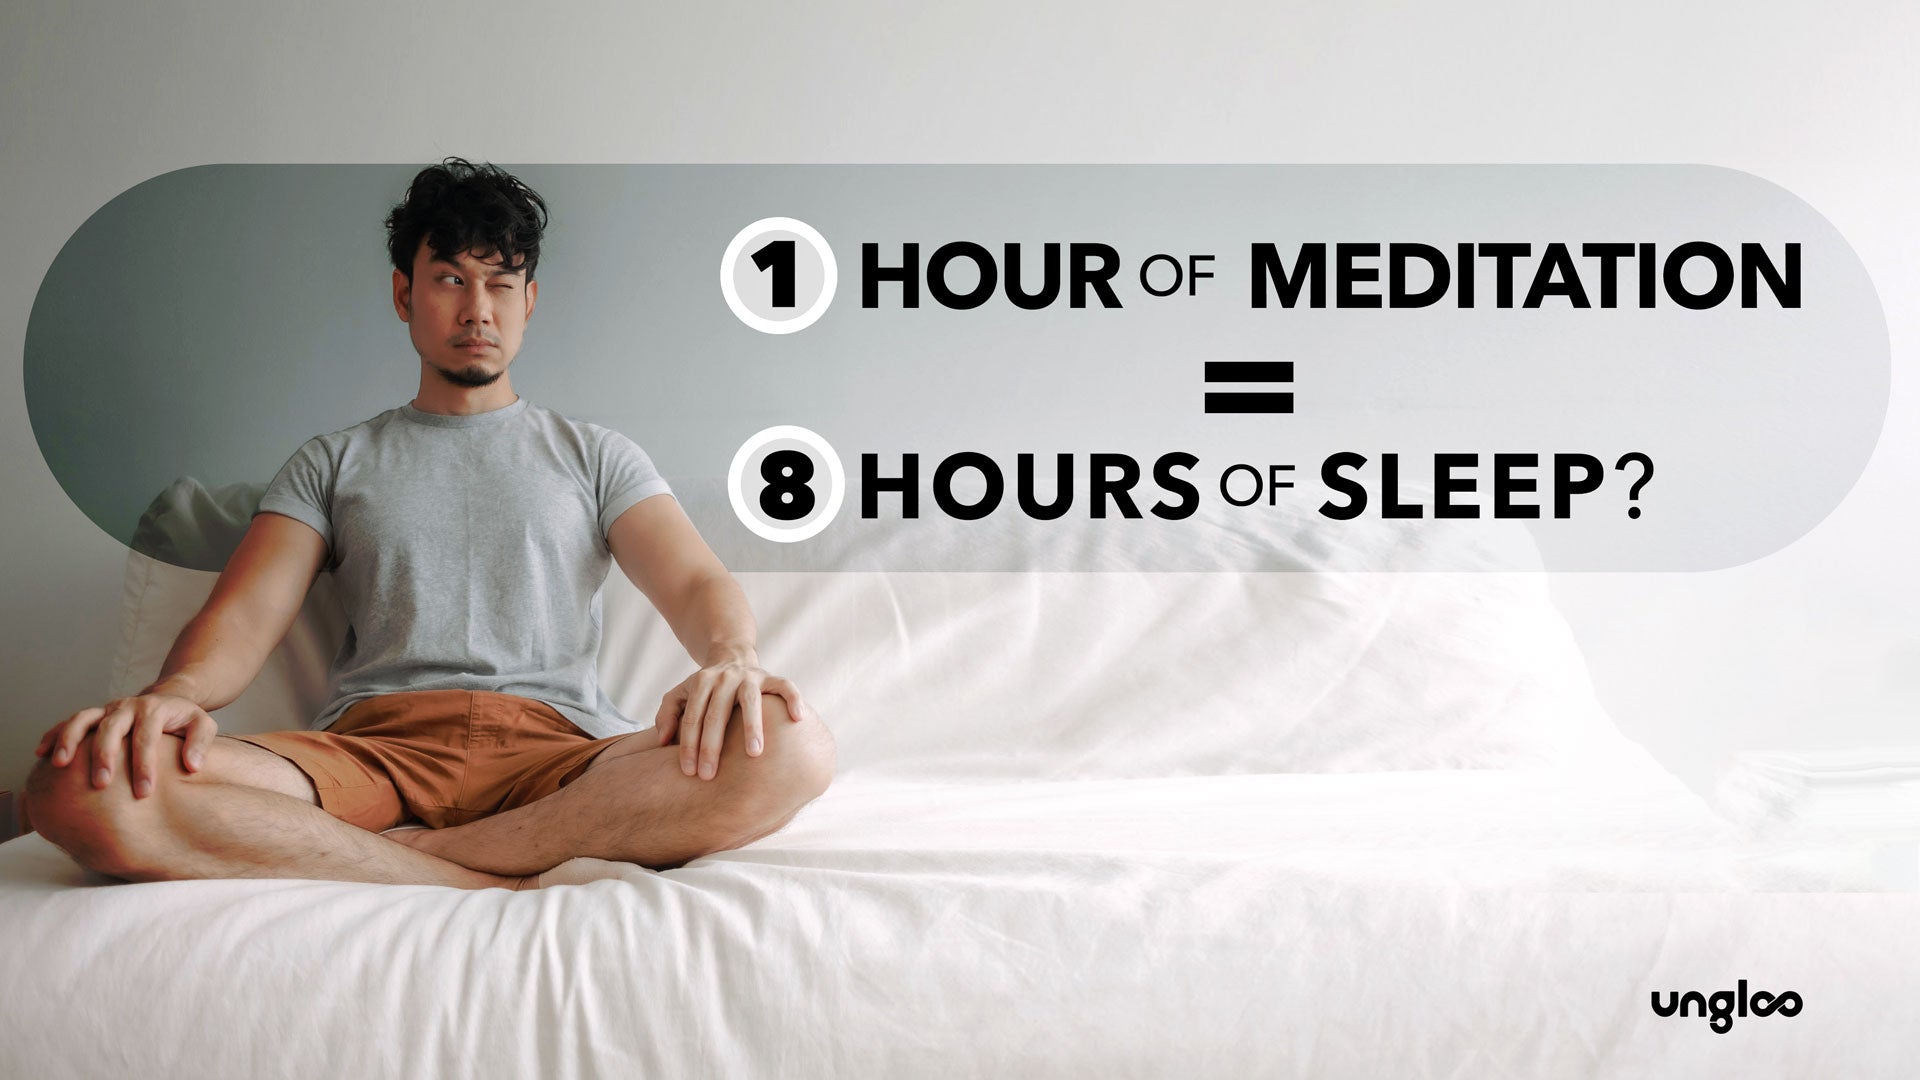 What Will Happen If I Meditate for 1 Hour?